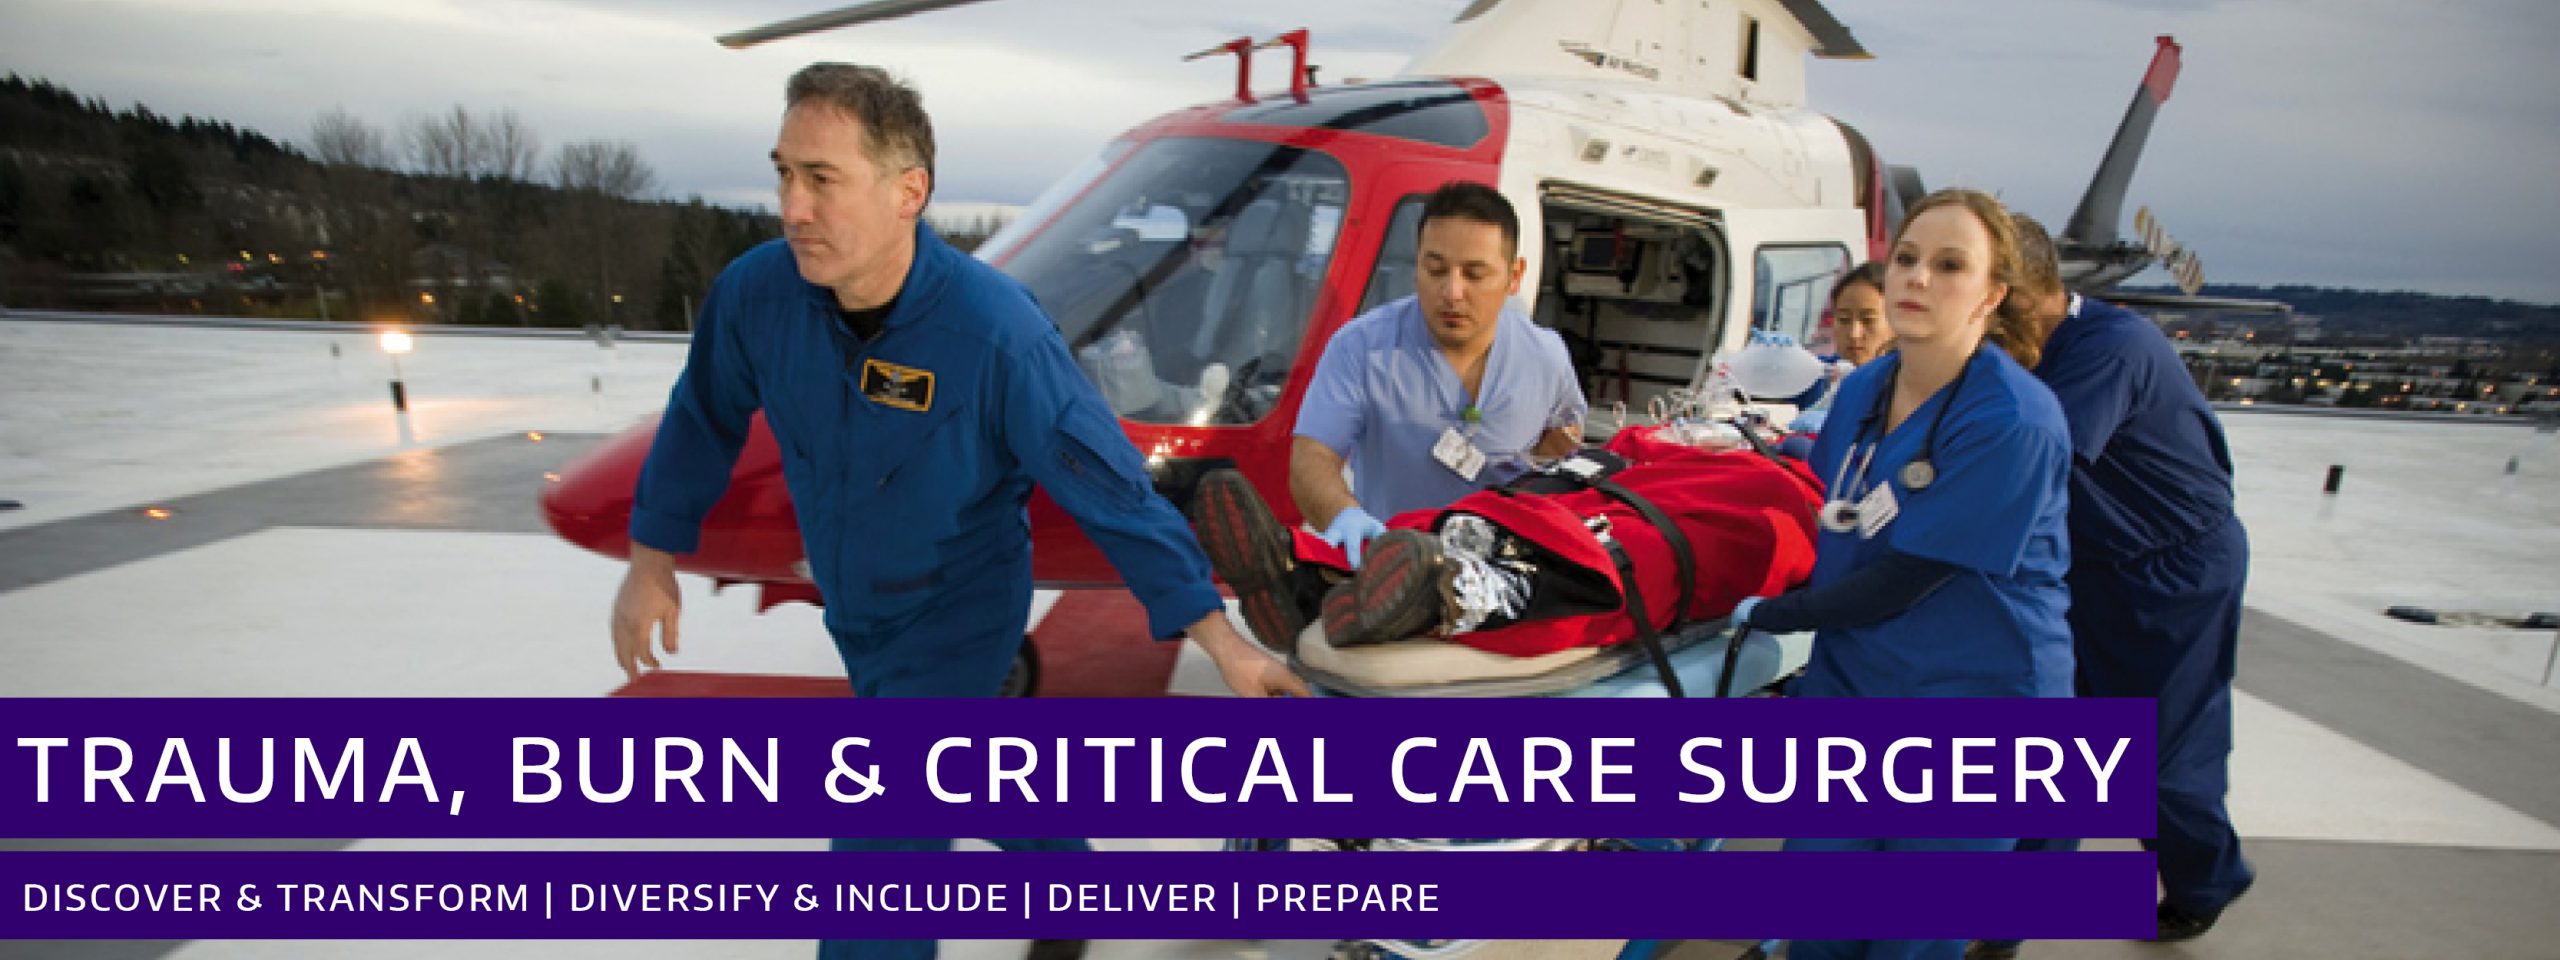 Department of Surgery Division of Trauma, Burn and Critical Care Surgery Header Image